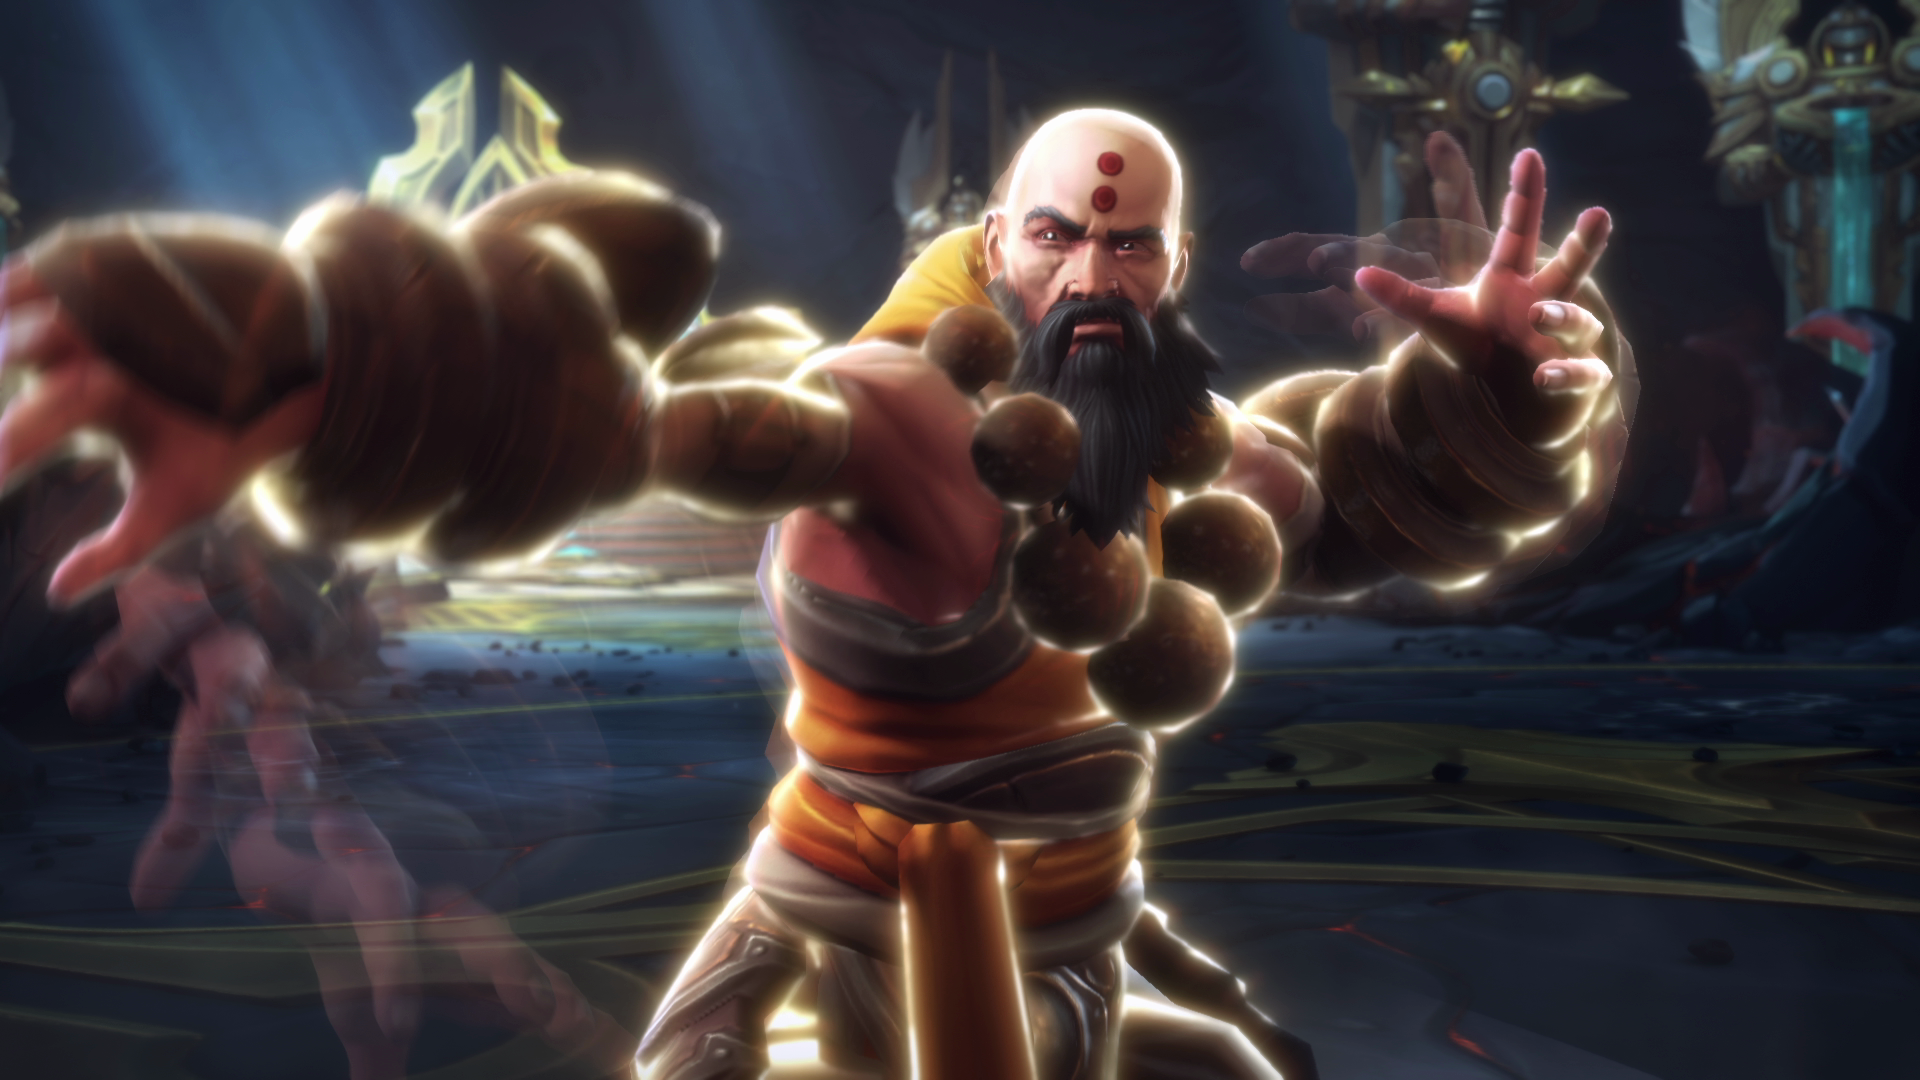 The Monk from Diablo 3 is coming to Heroes of the Storm | PC Gamer